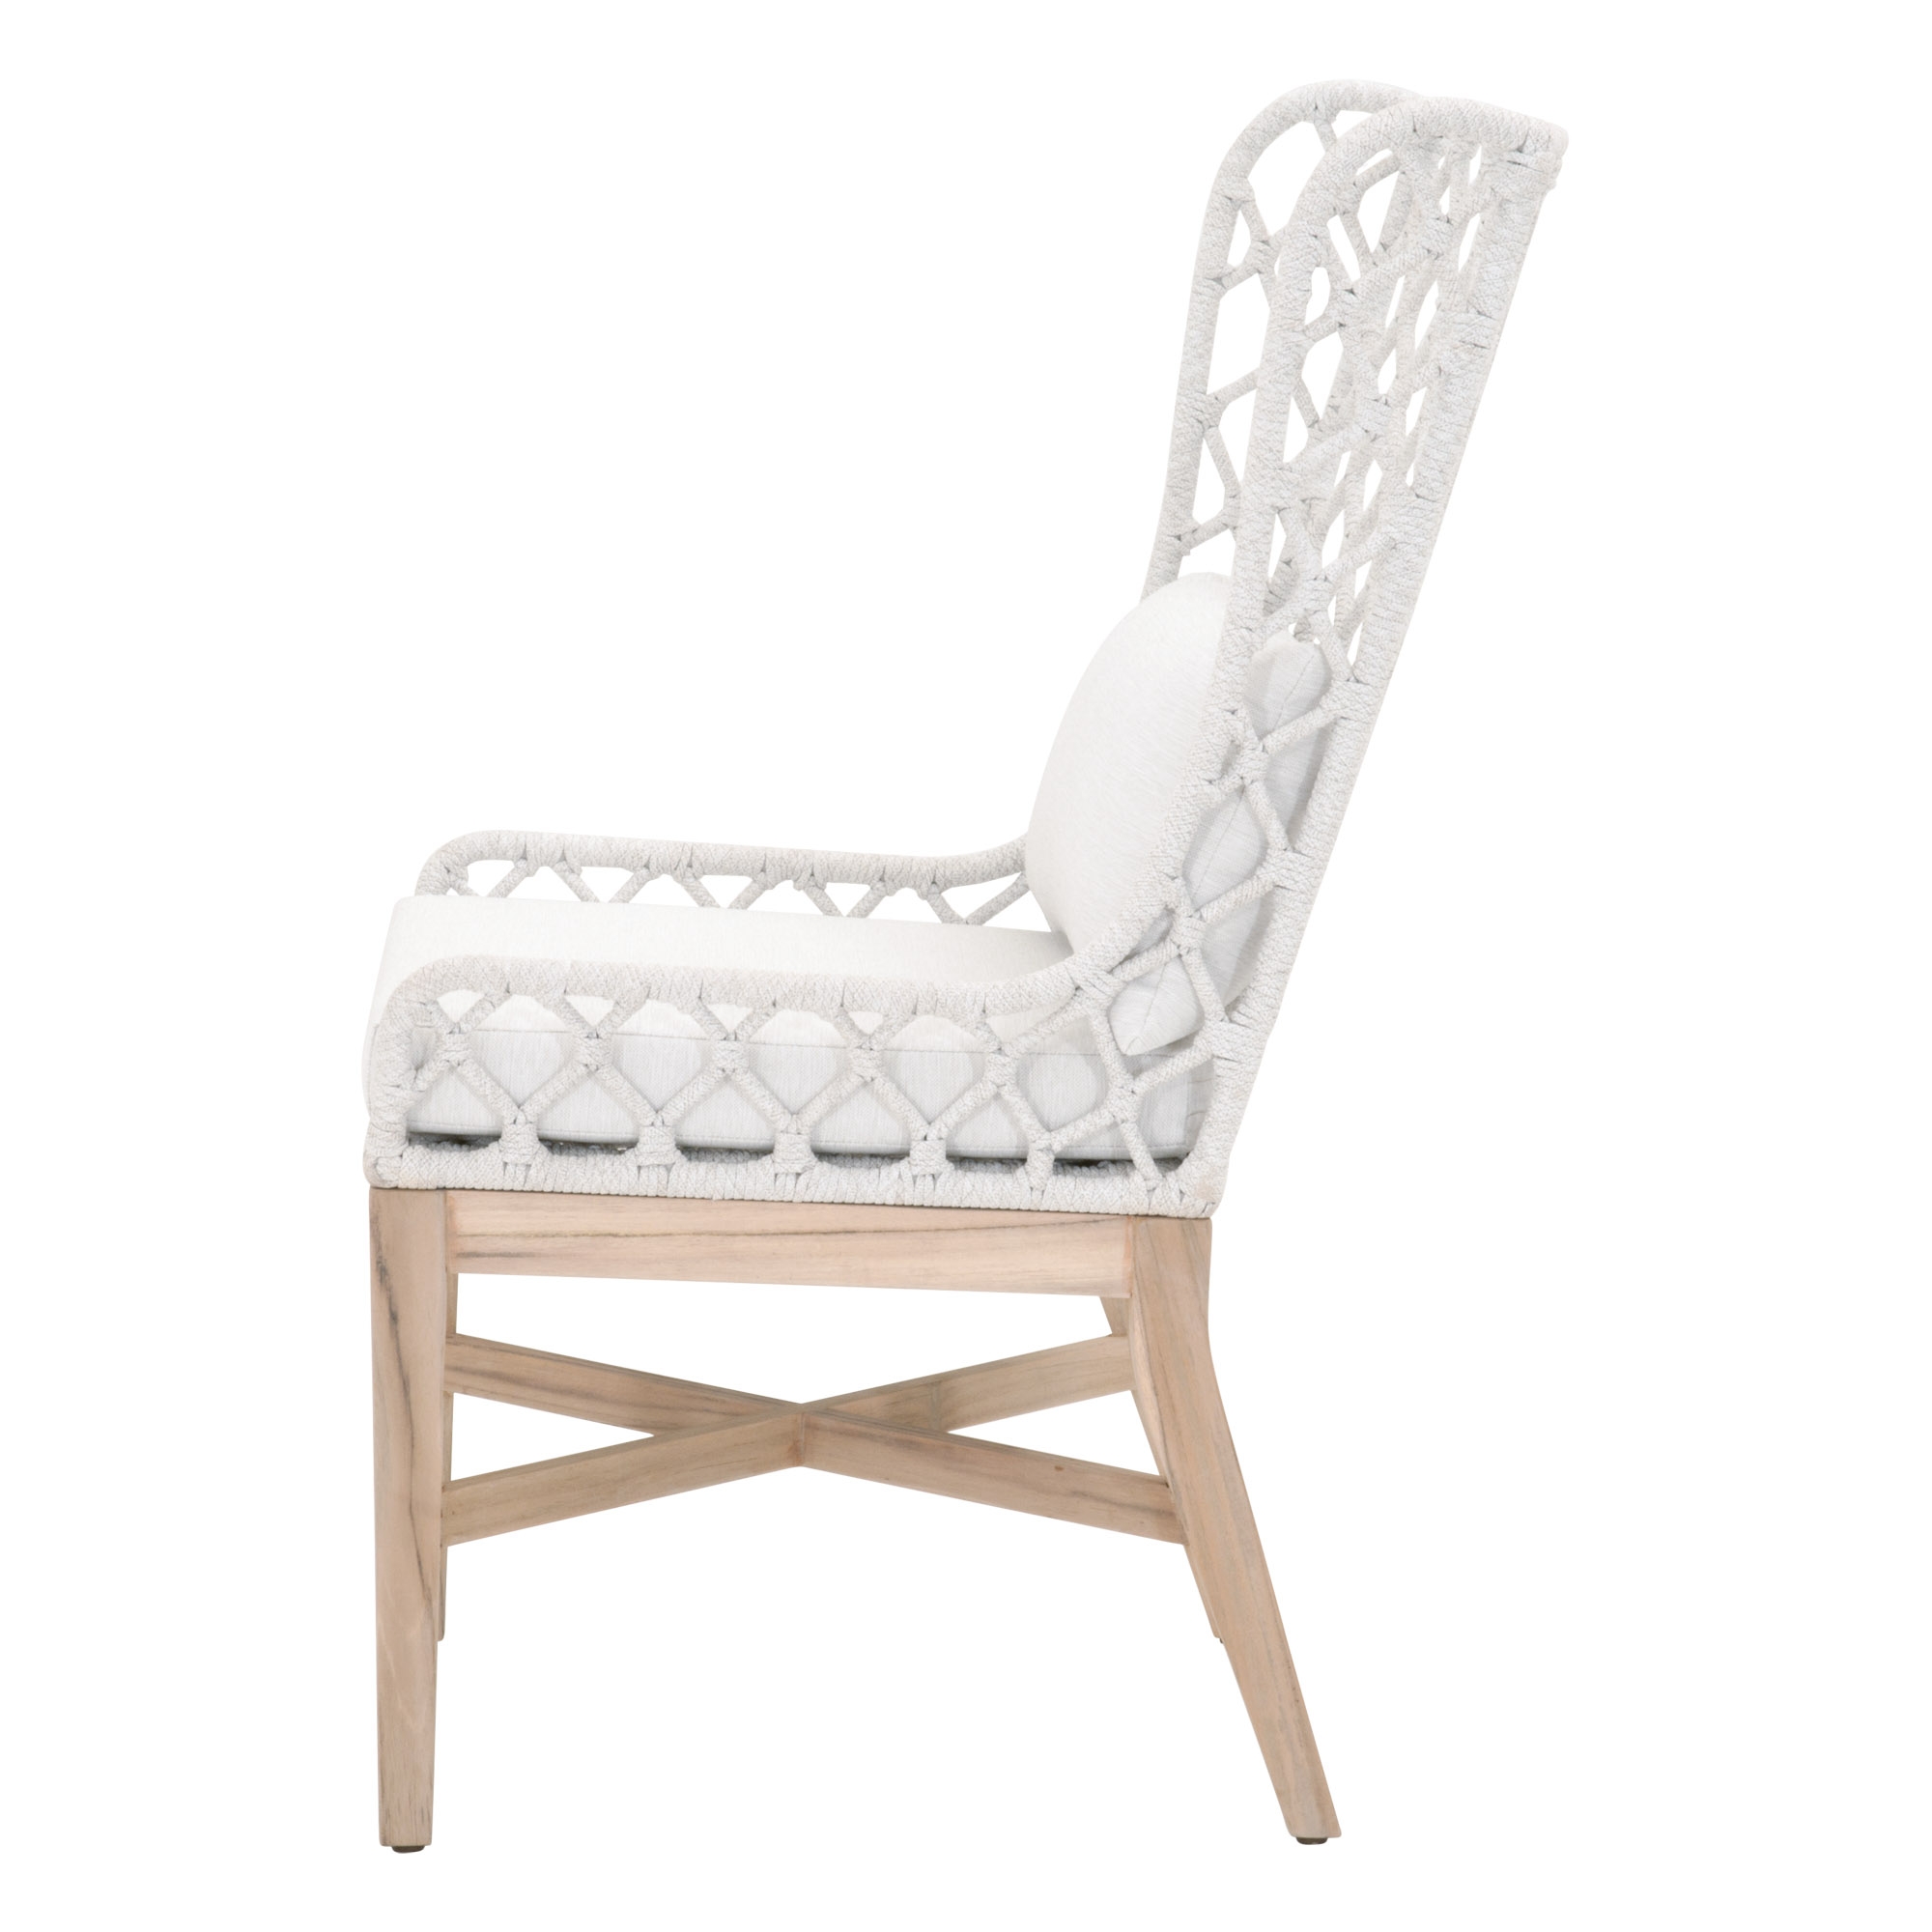 Lattis Outdoor Wing Chair, White - Image 2